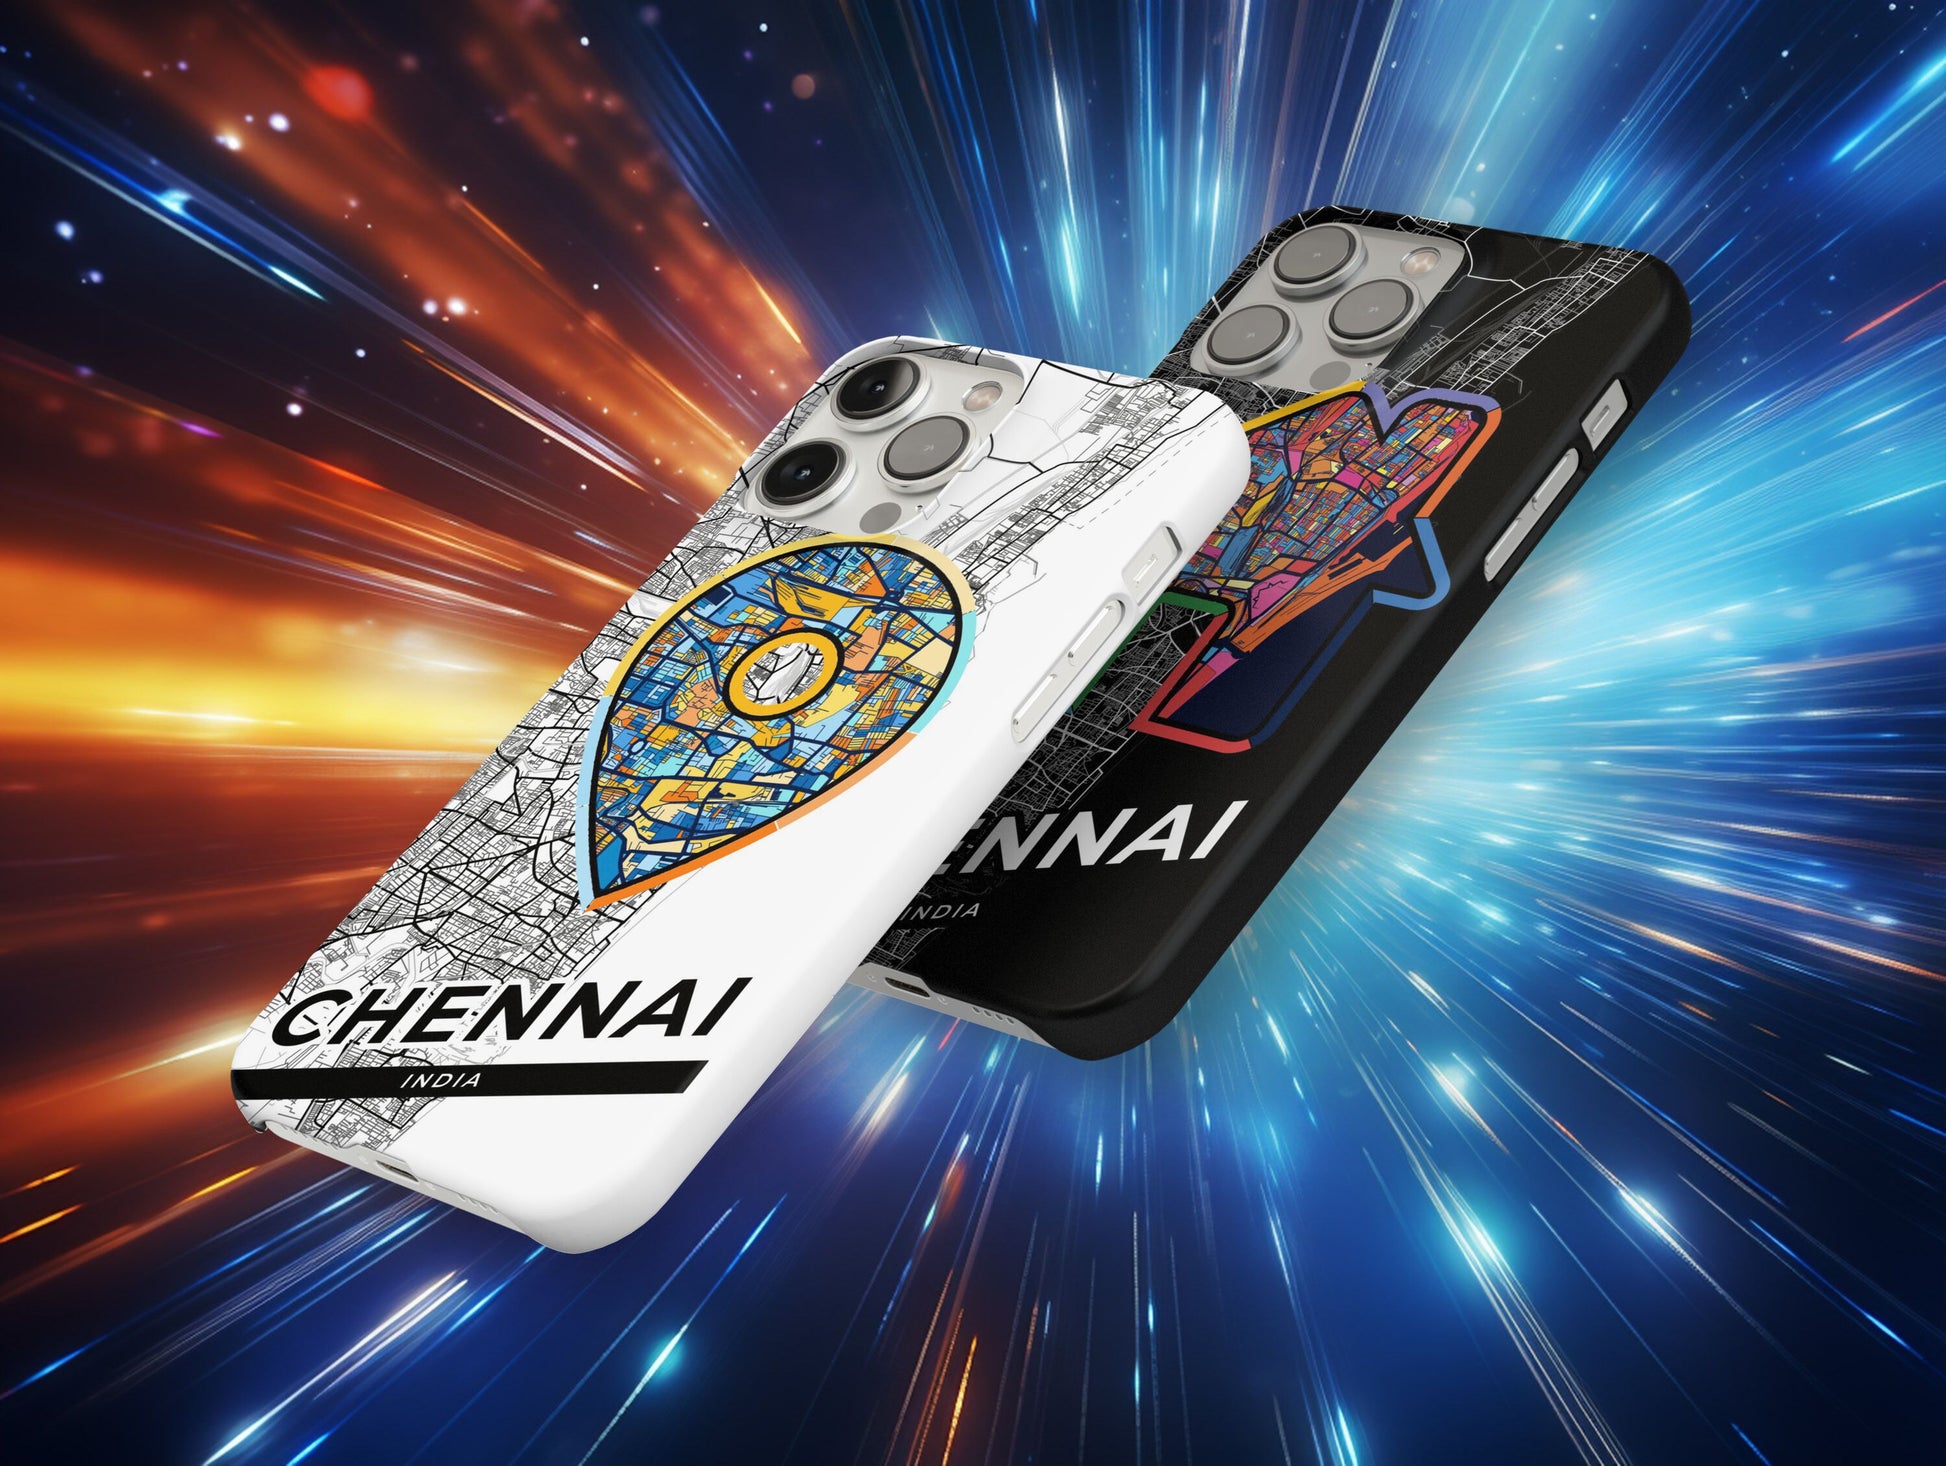 Chennai India slim phone case with colorful icon. Birthday, wedding or housewarming gift. Couple match cases.